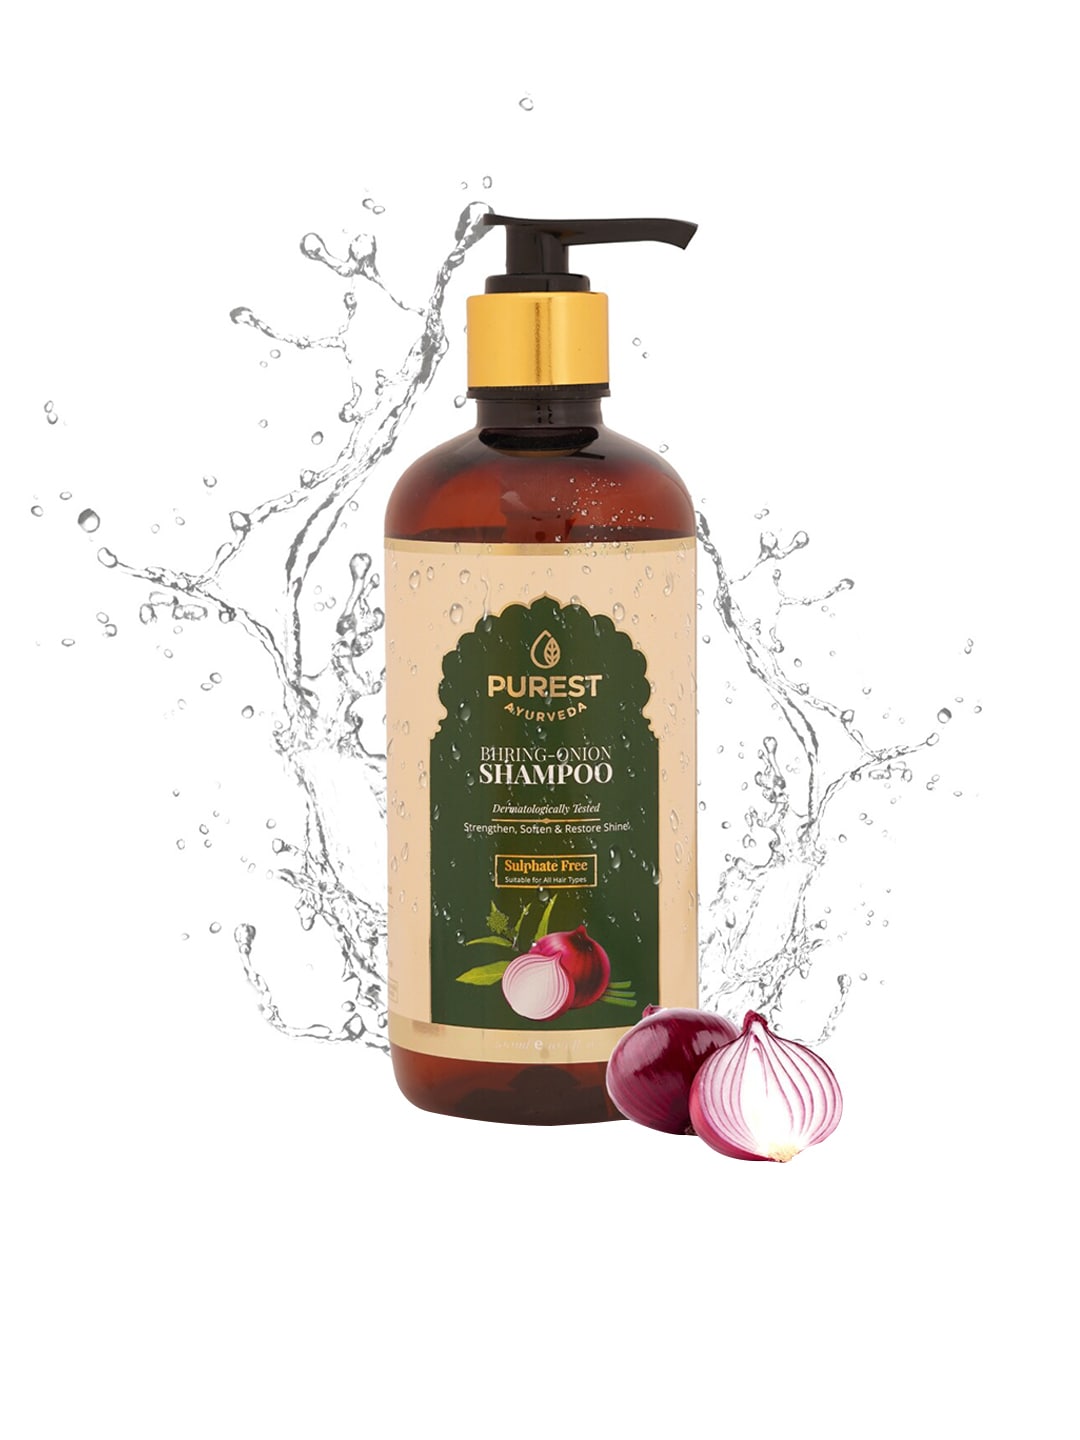 PUREST AYURVEDA Bhring-Onion Hair Care Shampoo - 300 ml Price in India